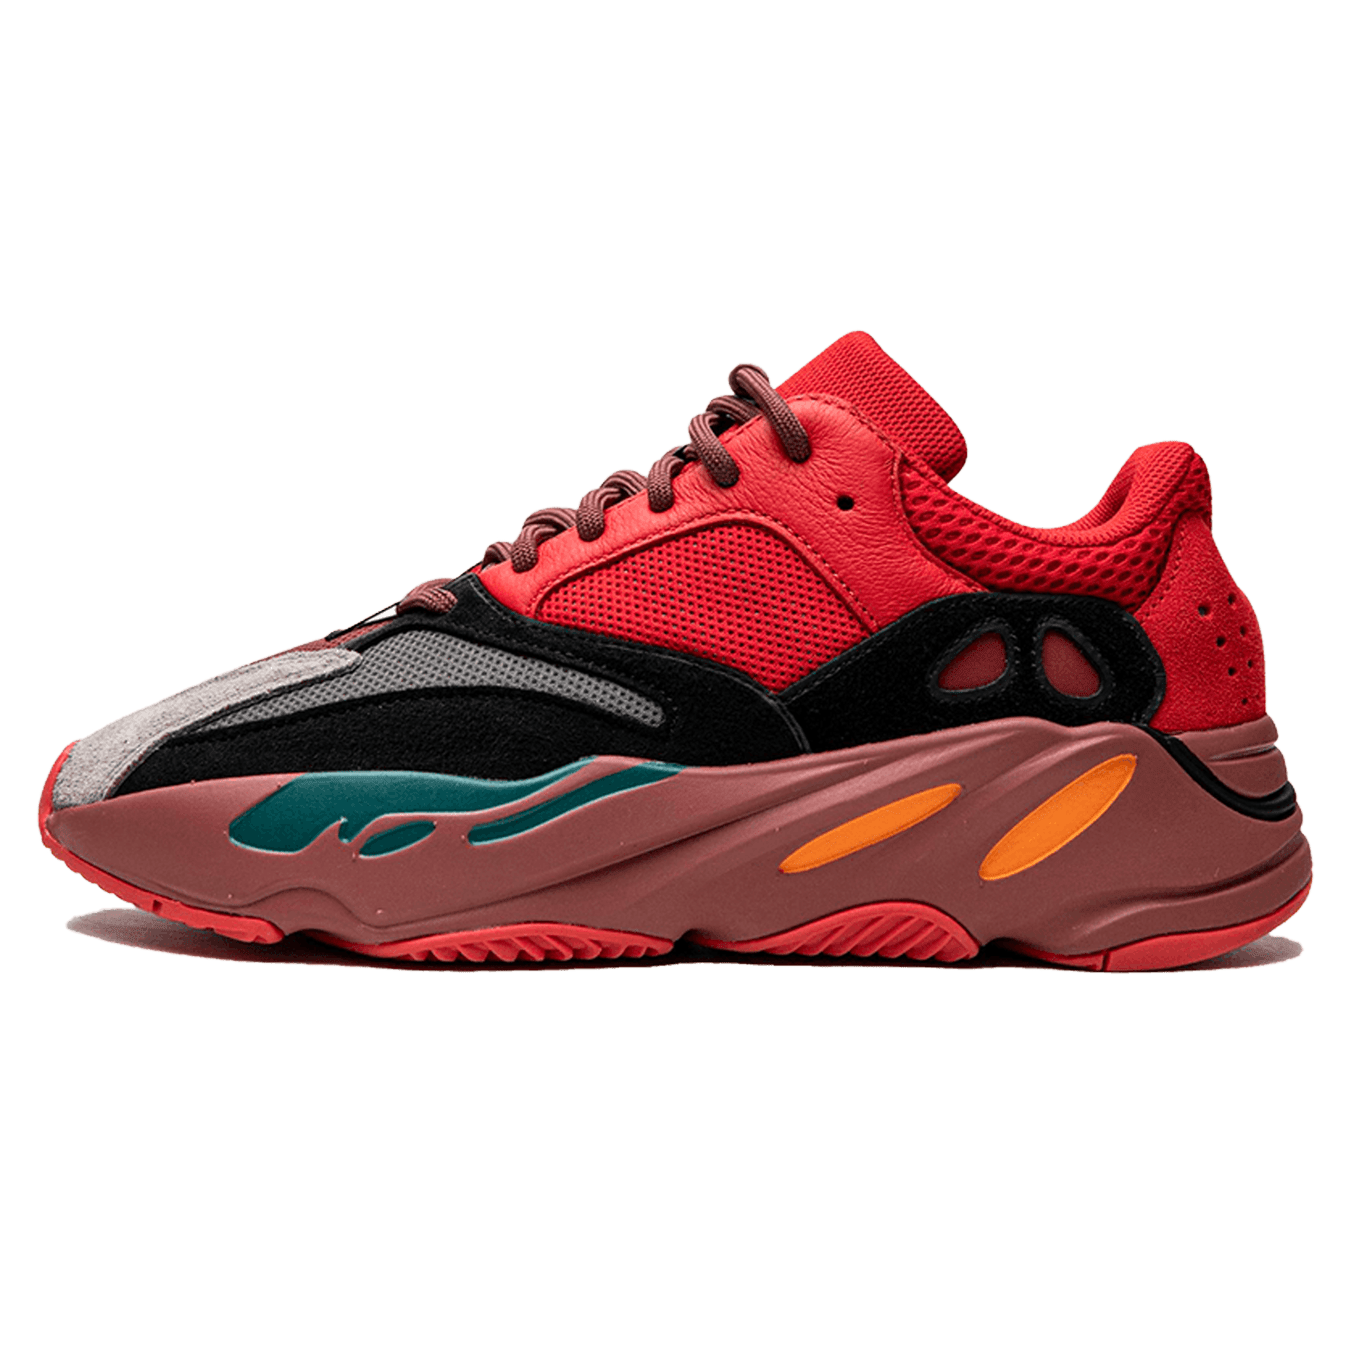 Yeezy Boost 700 Hi Res Red HQ6979